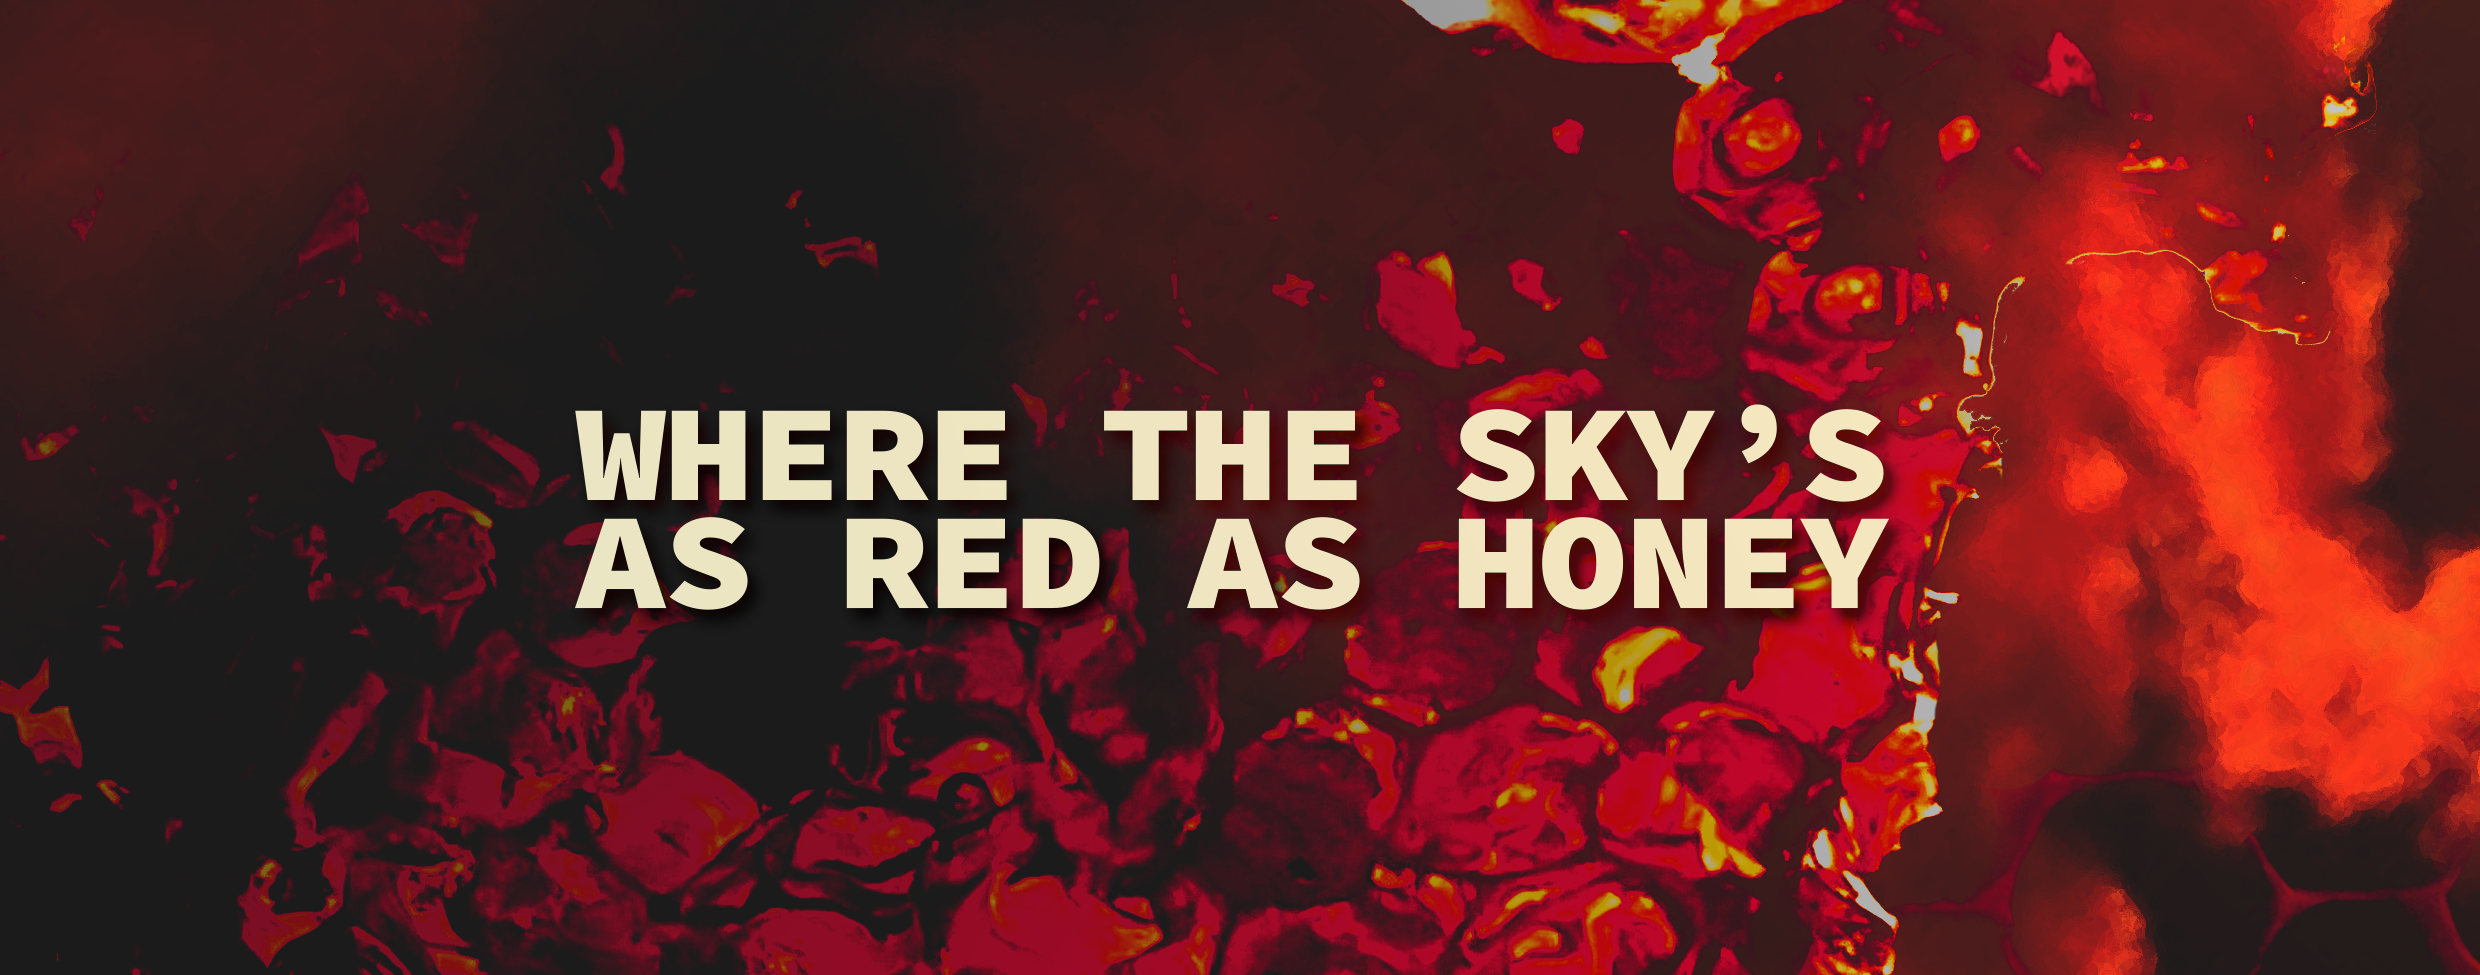 Where the Sky's as Red as Honey